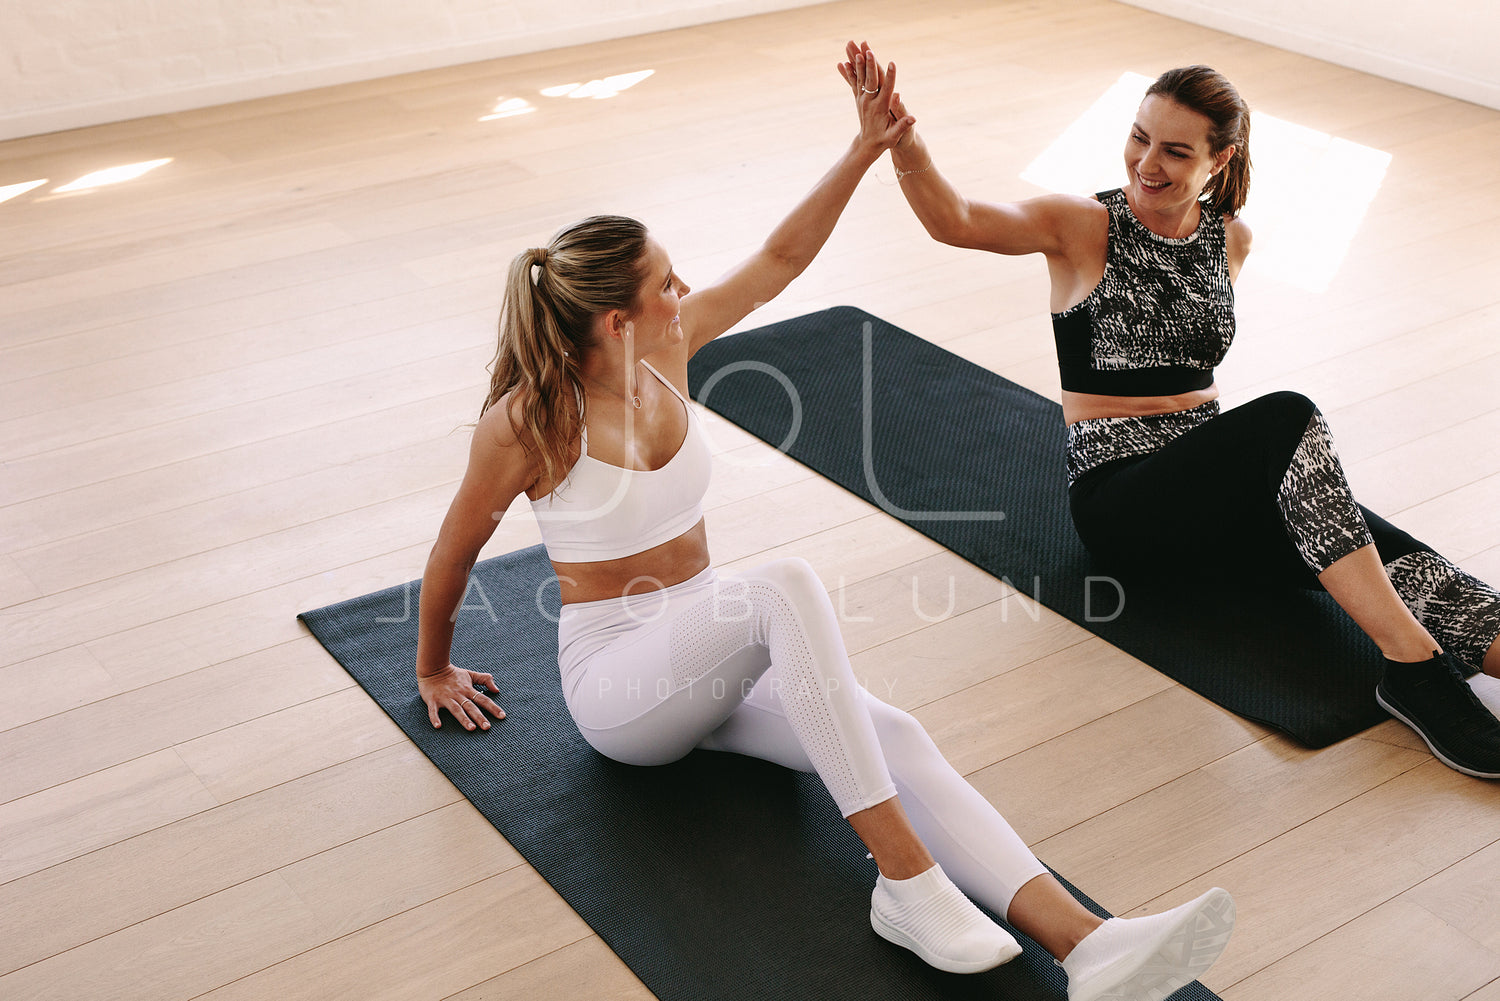 Fitness women motivating each other at the gym – Jacob Lund Photography  Store- premium stock photo